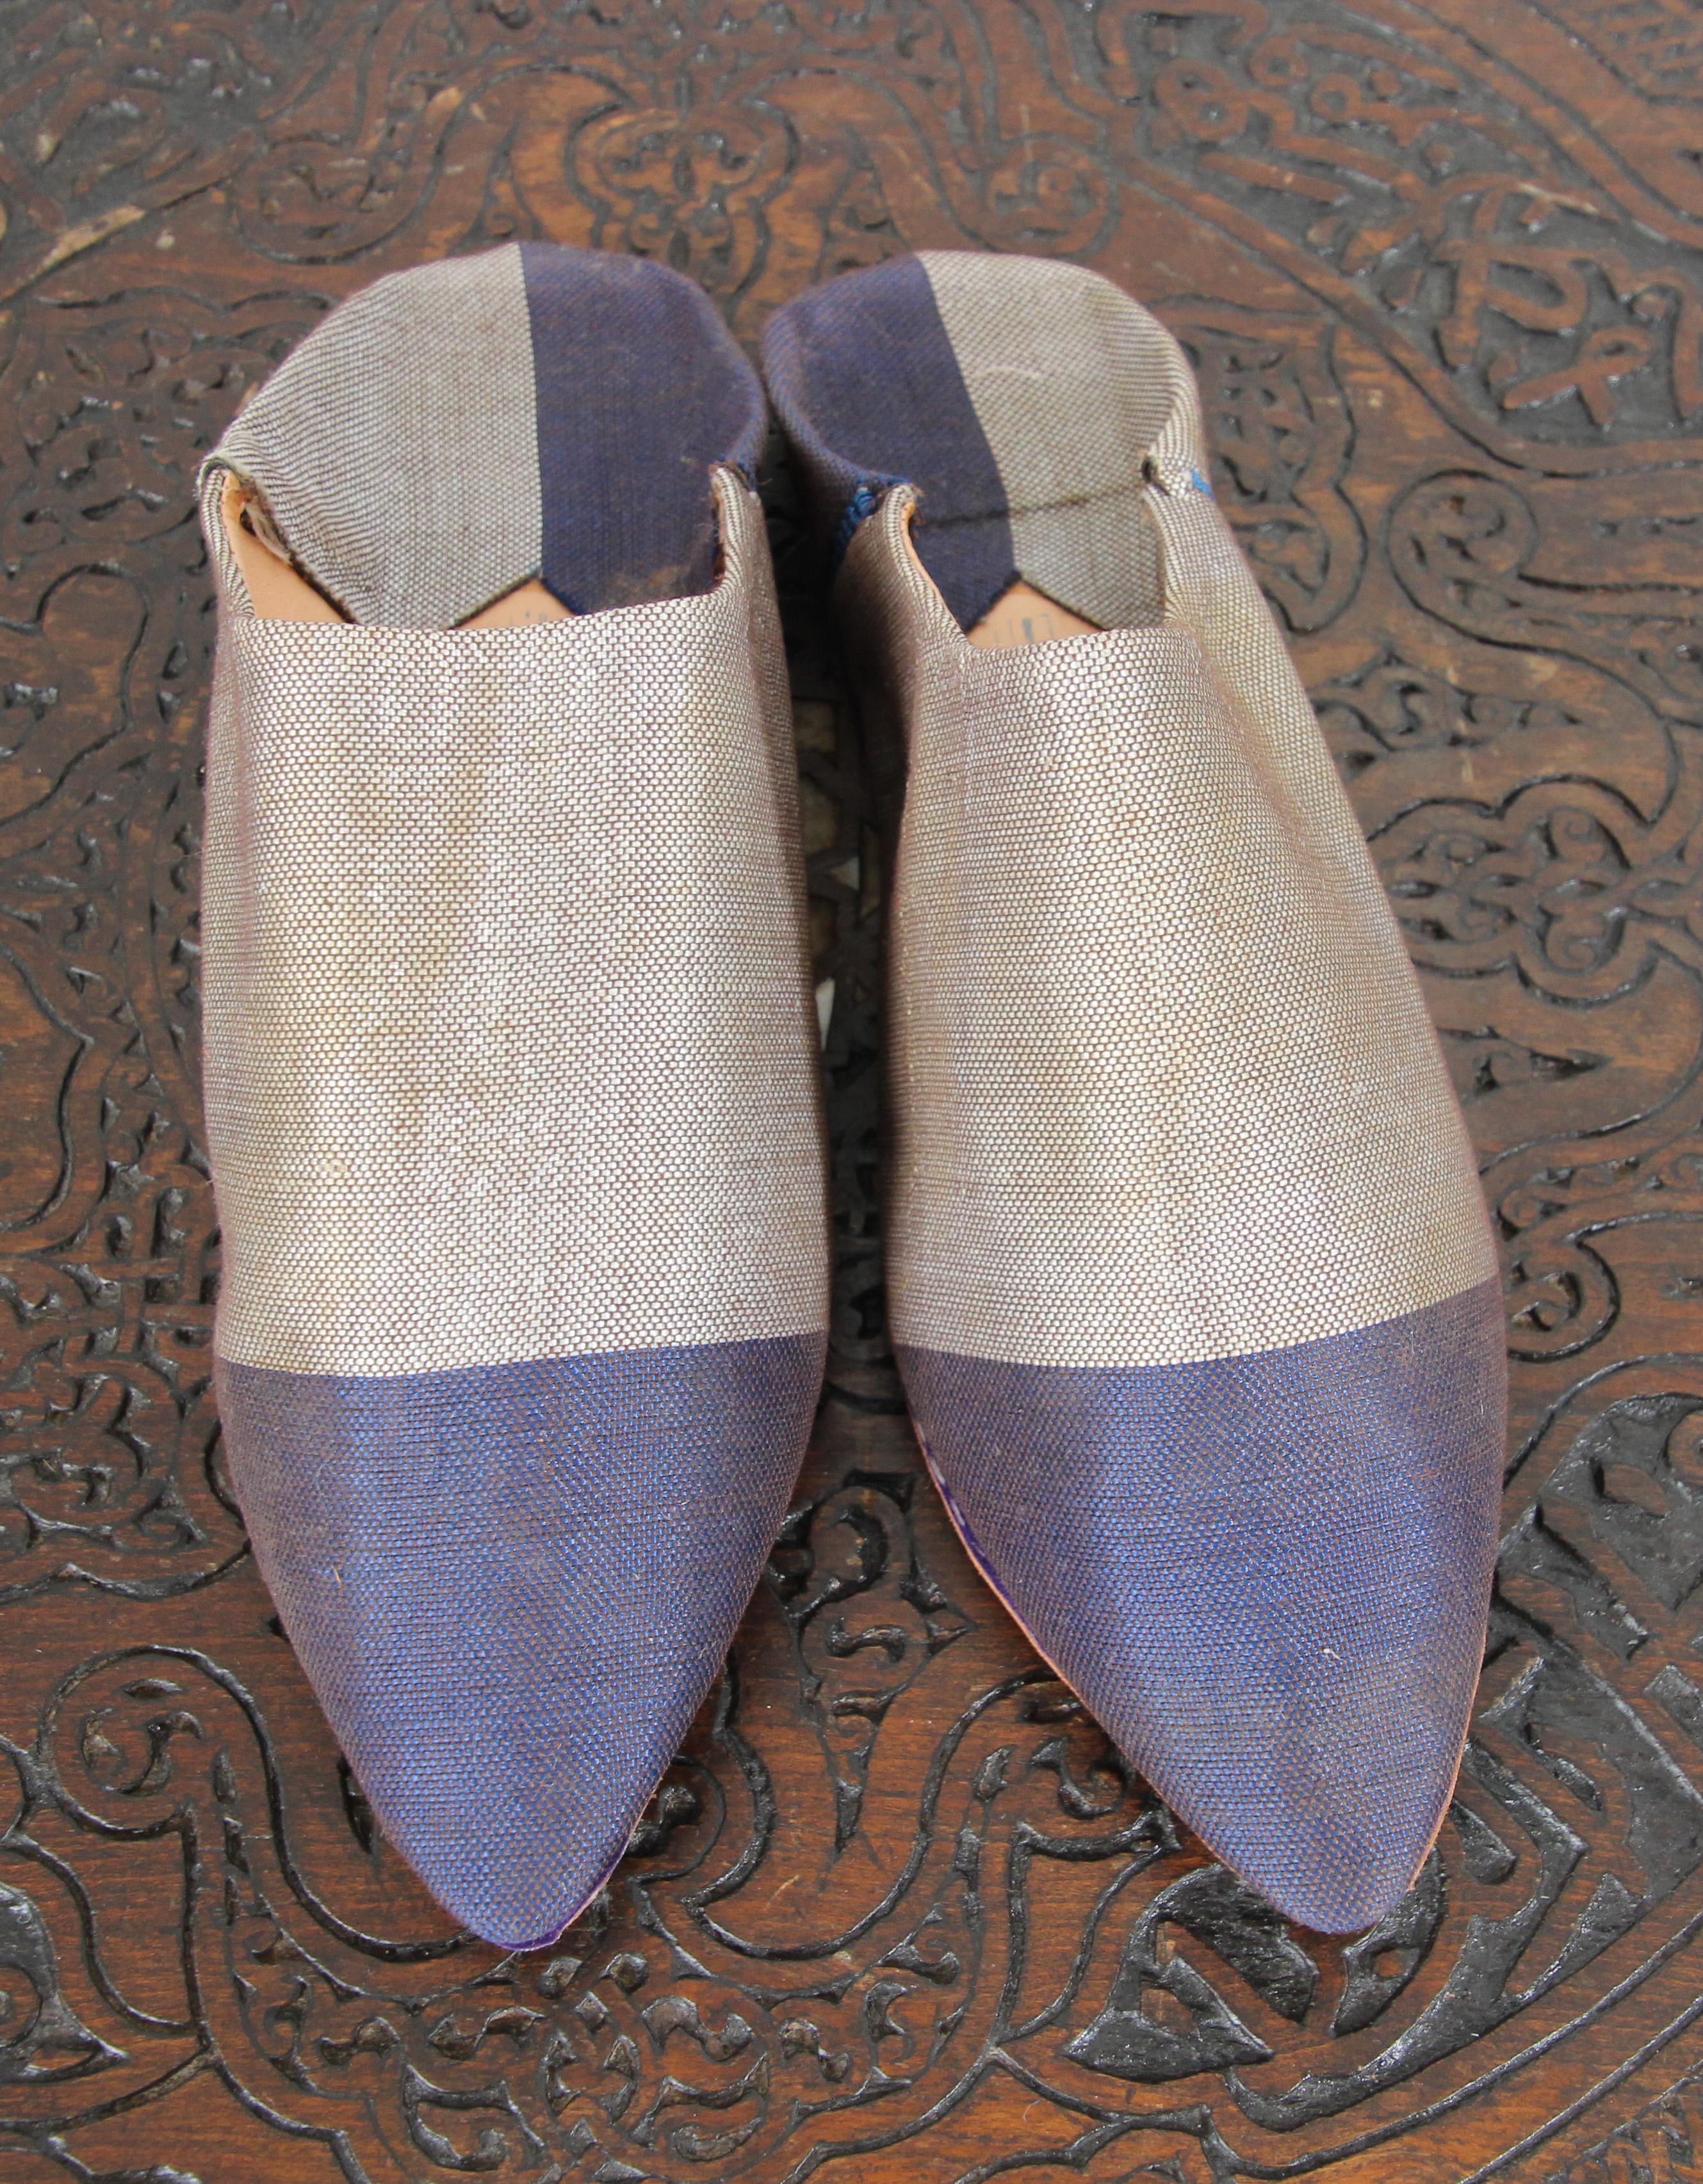 These Moroccan silk slippers are handmade to perfection the inside sole is crafted of soft leather.
hand-sewn leather sole.
You won't want to take the Moroccan babouches off your feet!
Moroccan slippers to wear around the pool or at the beach